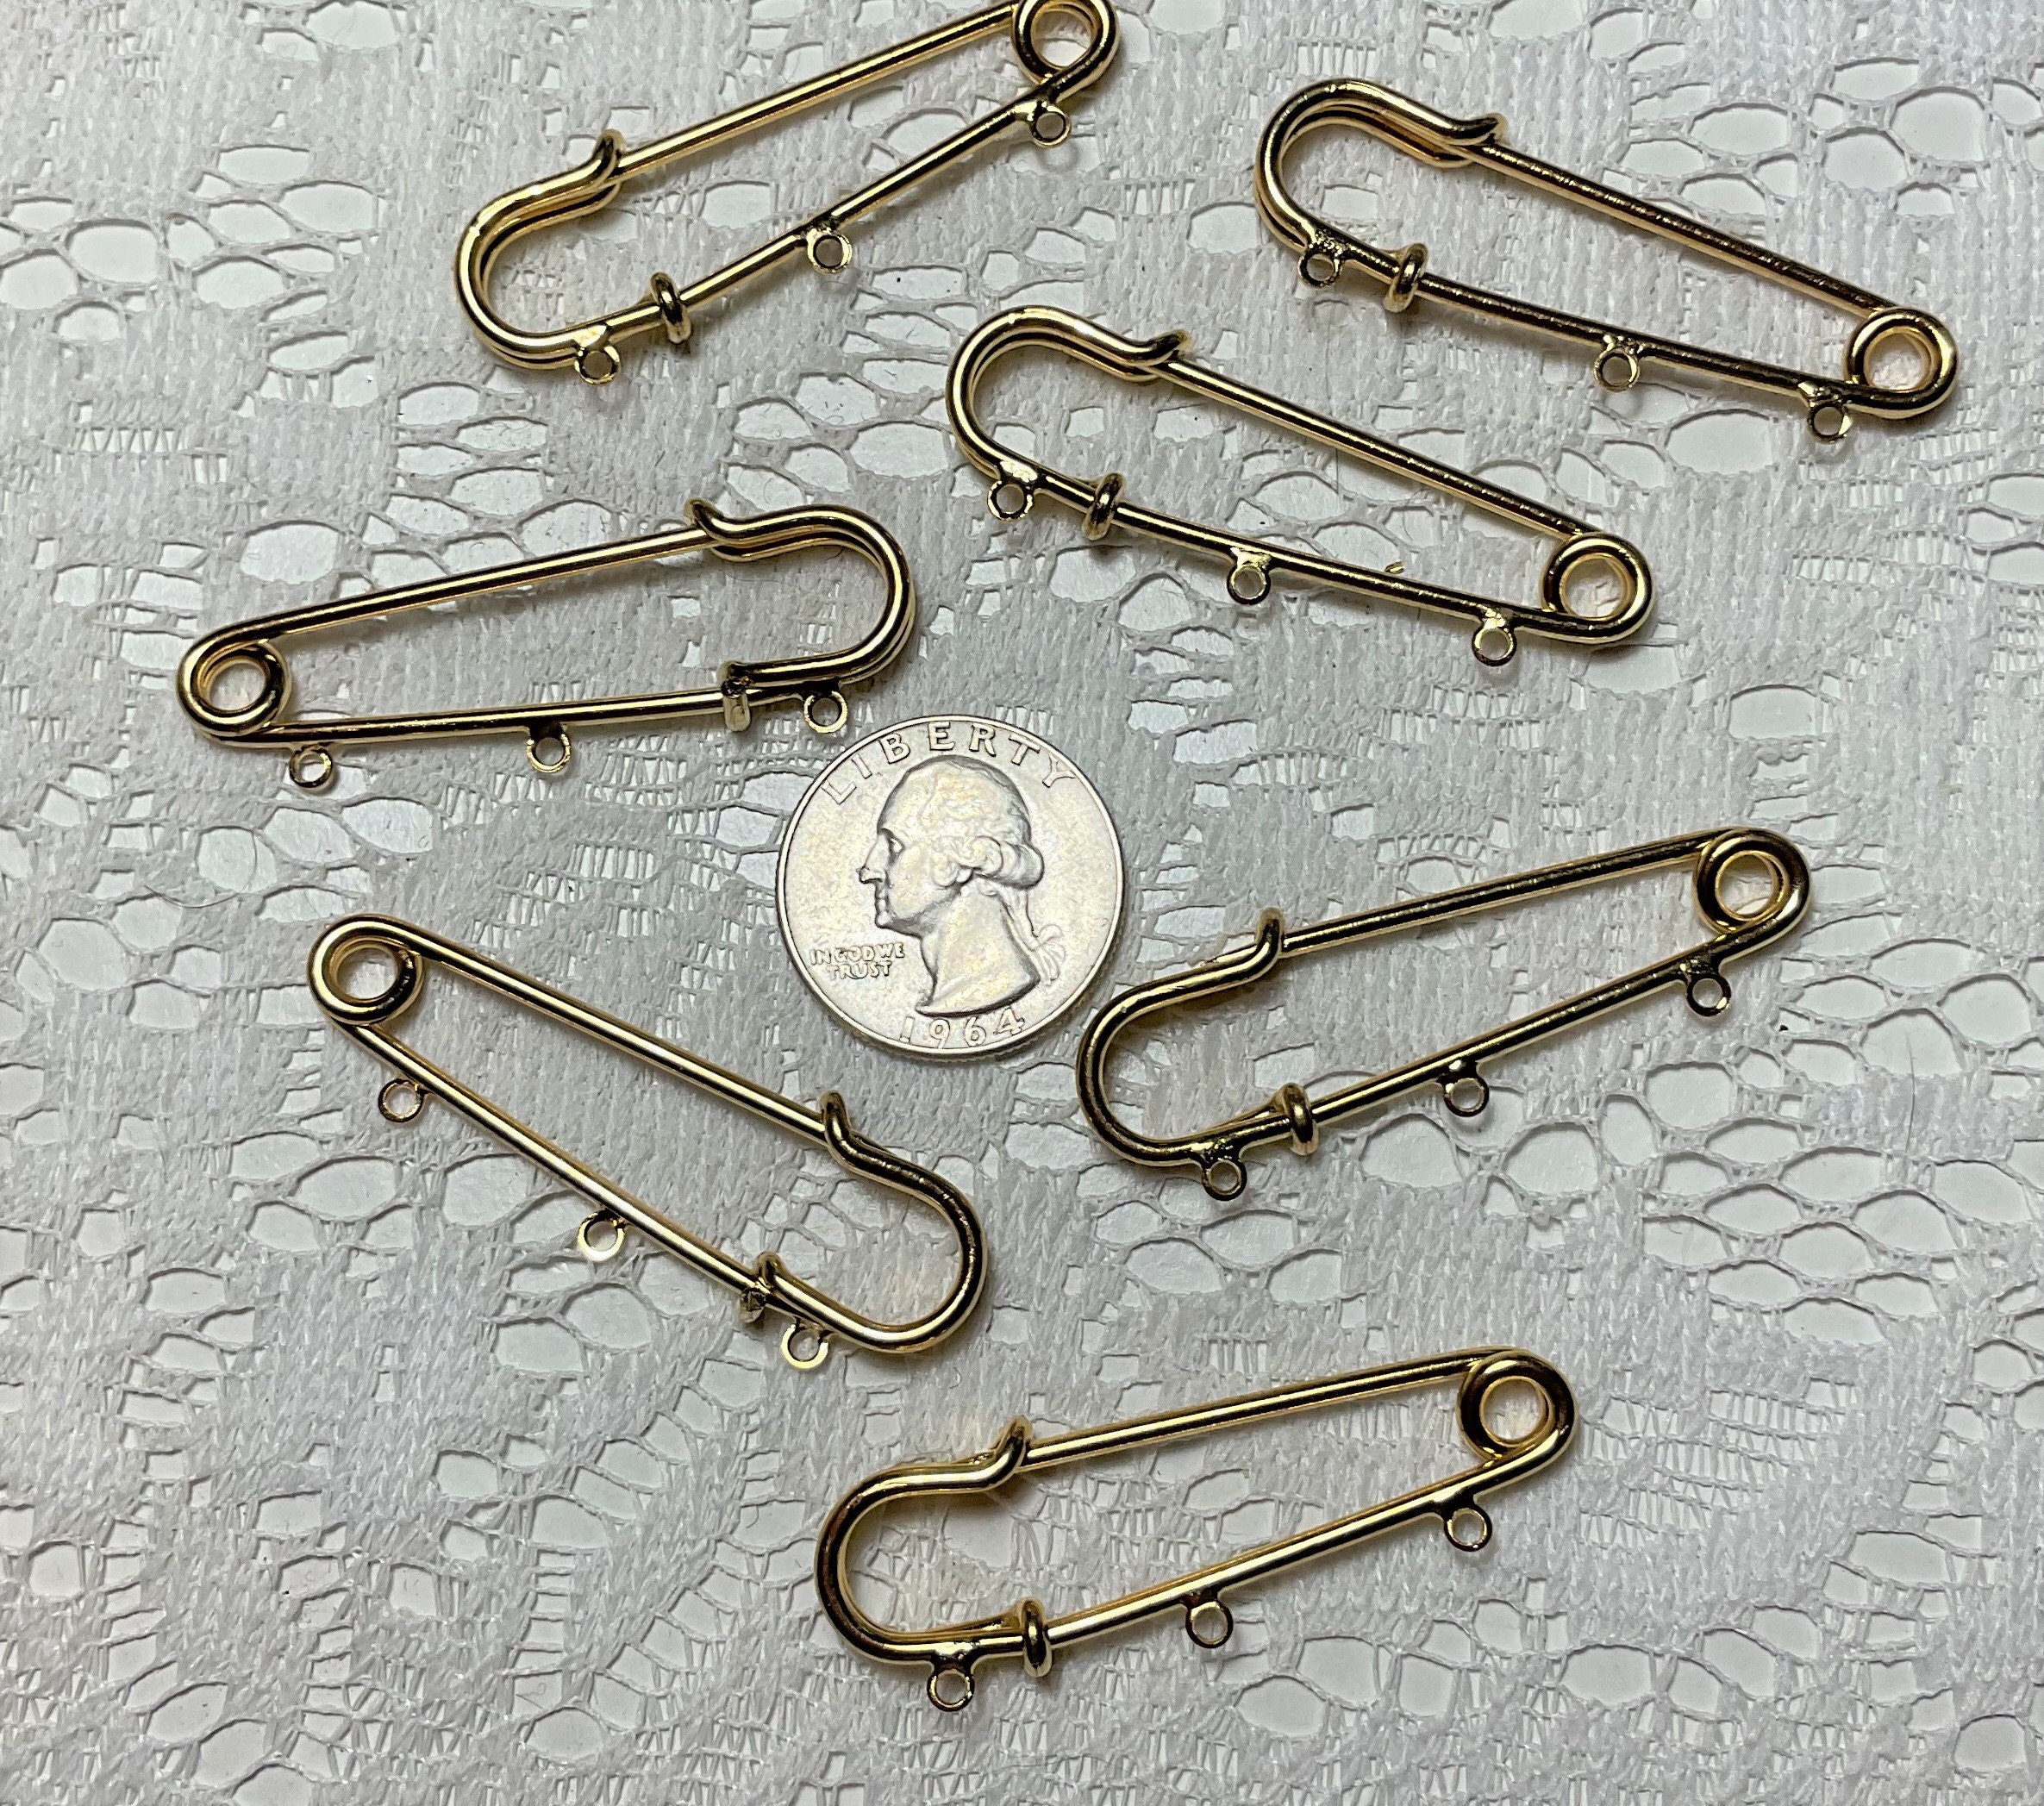 50pcs/set White Stainless Steel Safety Pins For Diapers, Bibs And Crafts,  With Bread-like Head For Child